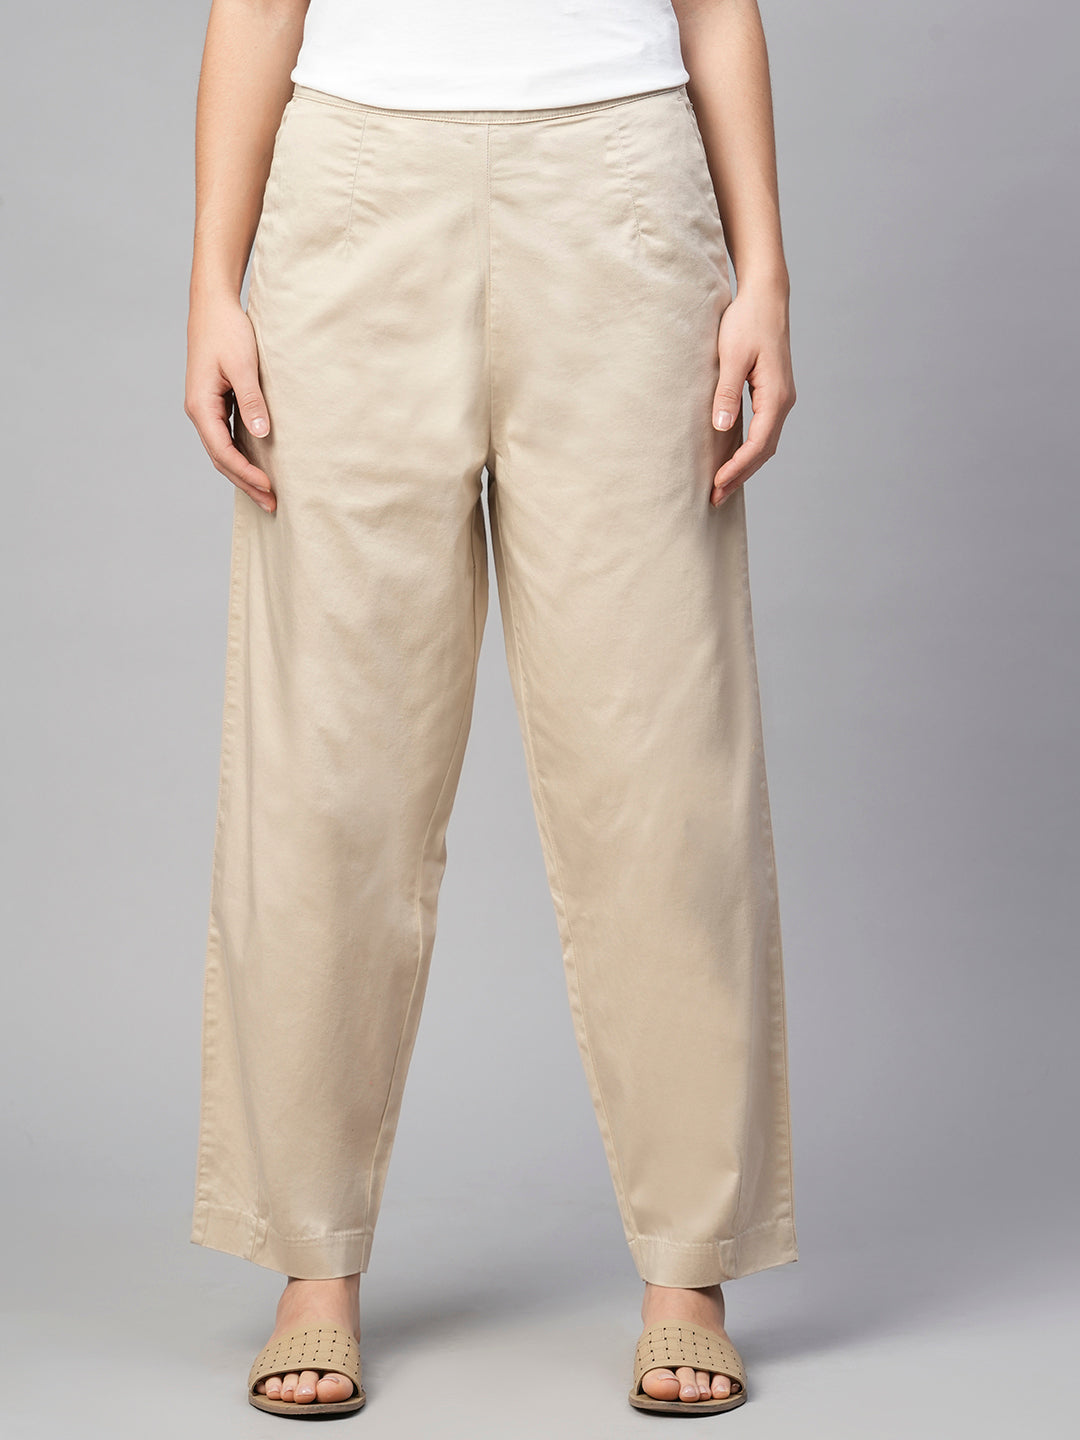 Trousers for Women: Buy Pants for Women Online in India